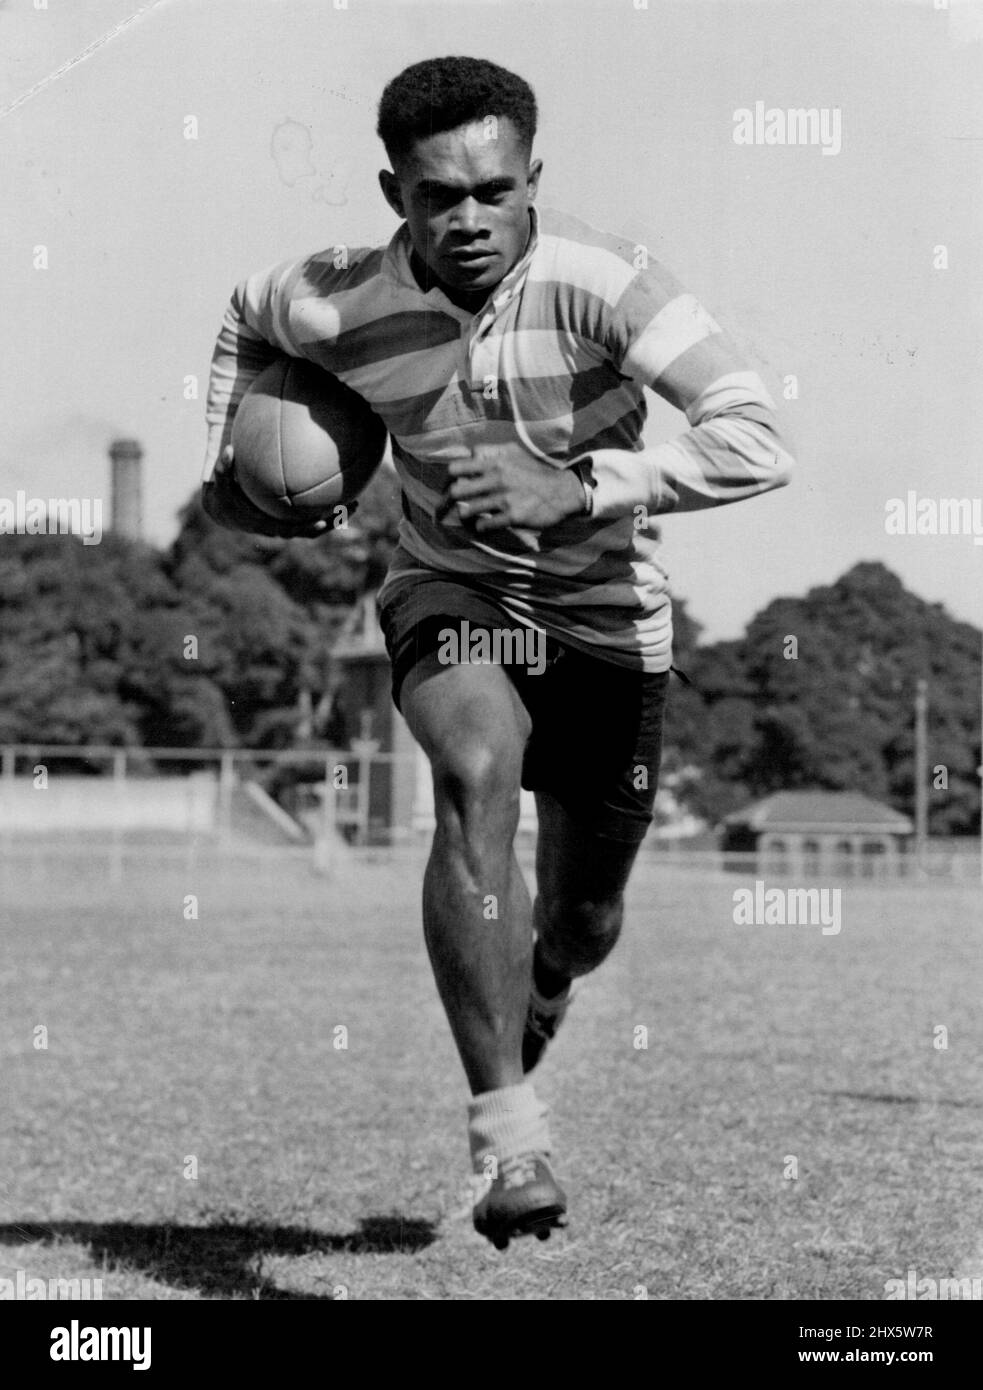 Fiji R. U. Star for St. George -- Orisi Dawai, captain of the 1954 Fijian Rugby Union team which toured Australia, may play for St. George Rugby League club this season. Dawai has told the St. George club he is willing to pay his own fare to Australia. He has already obtained a visa to leave Fiji, and the St. George club is trying to arrange a landing permit for him. Dawai, who plays both centre and wing, was an outstanding attraction during the 1954 tour. May 13, 1954. Stock Photo